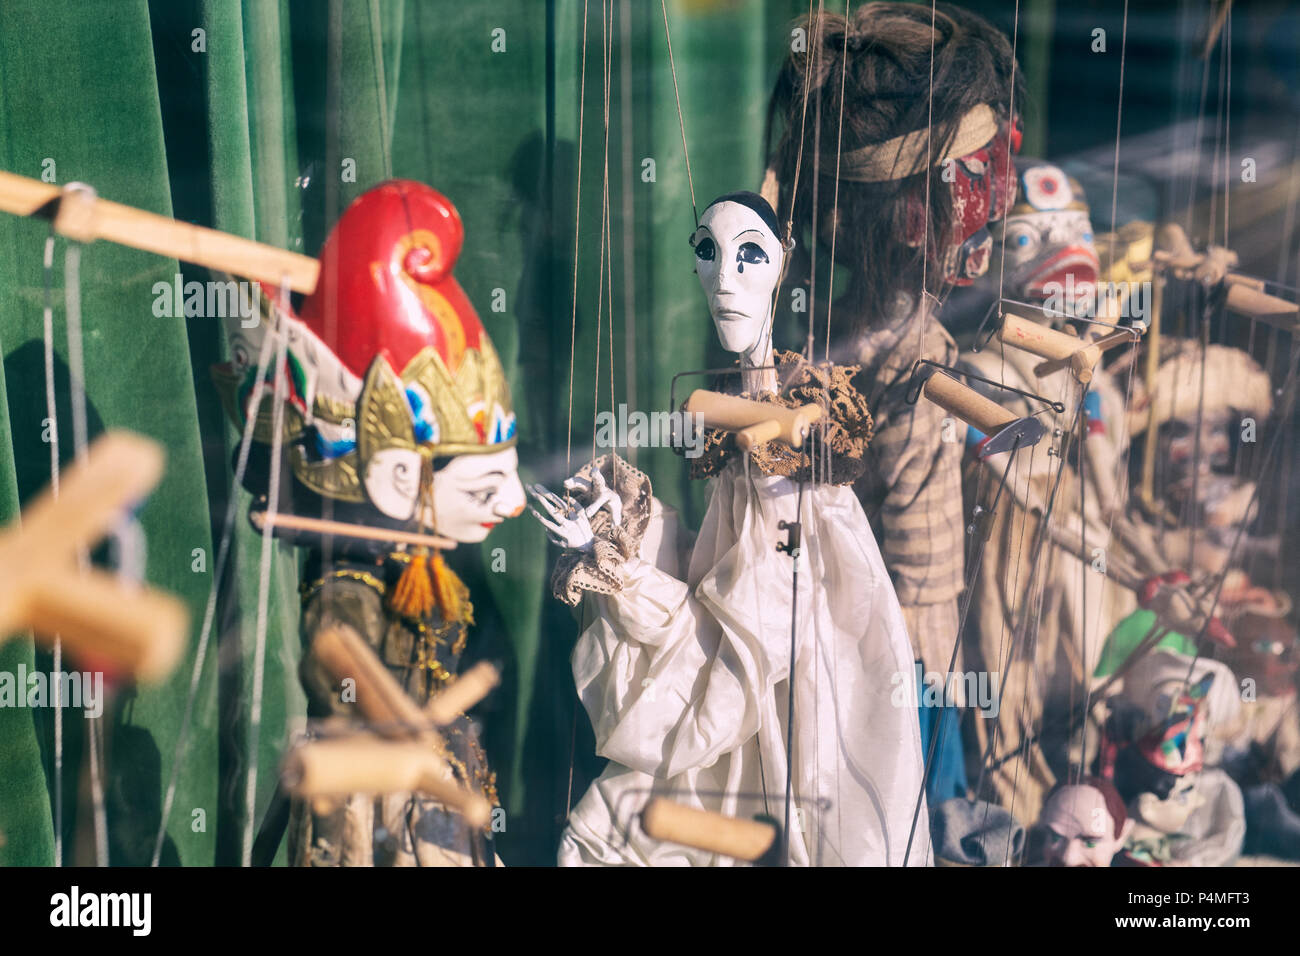 Marionettes in a window. Shipston on stour, Warwickshire, England. Vintage filter applied Stock Photo